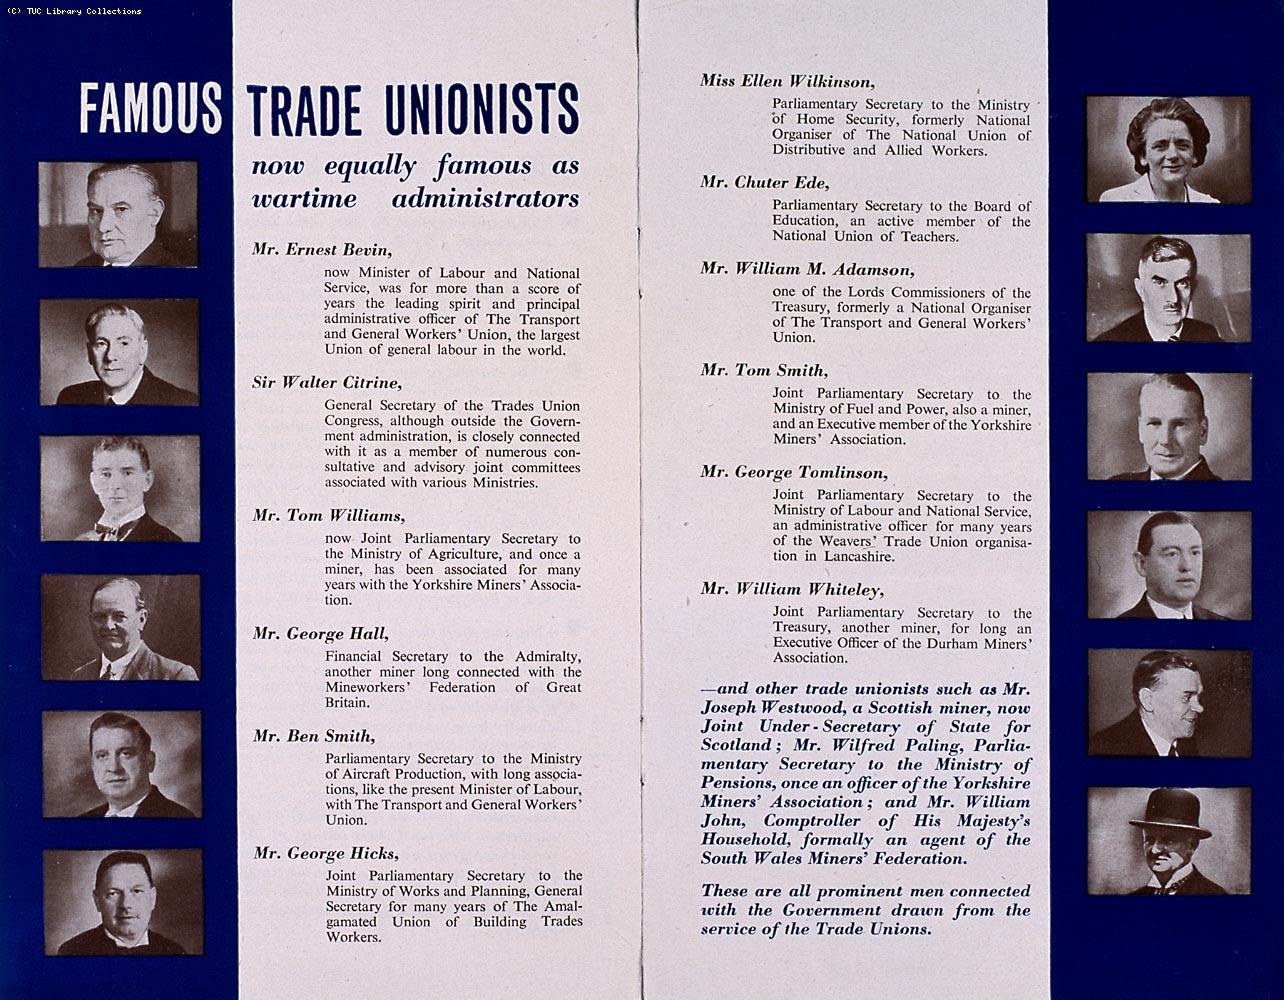 'The trade unionist and the war', 1943